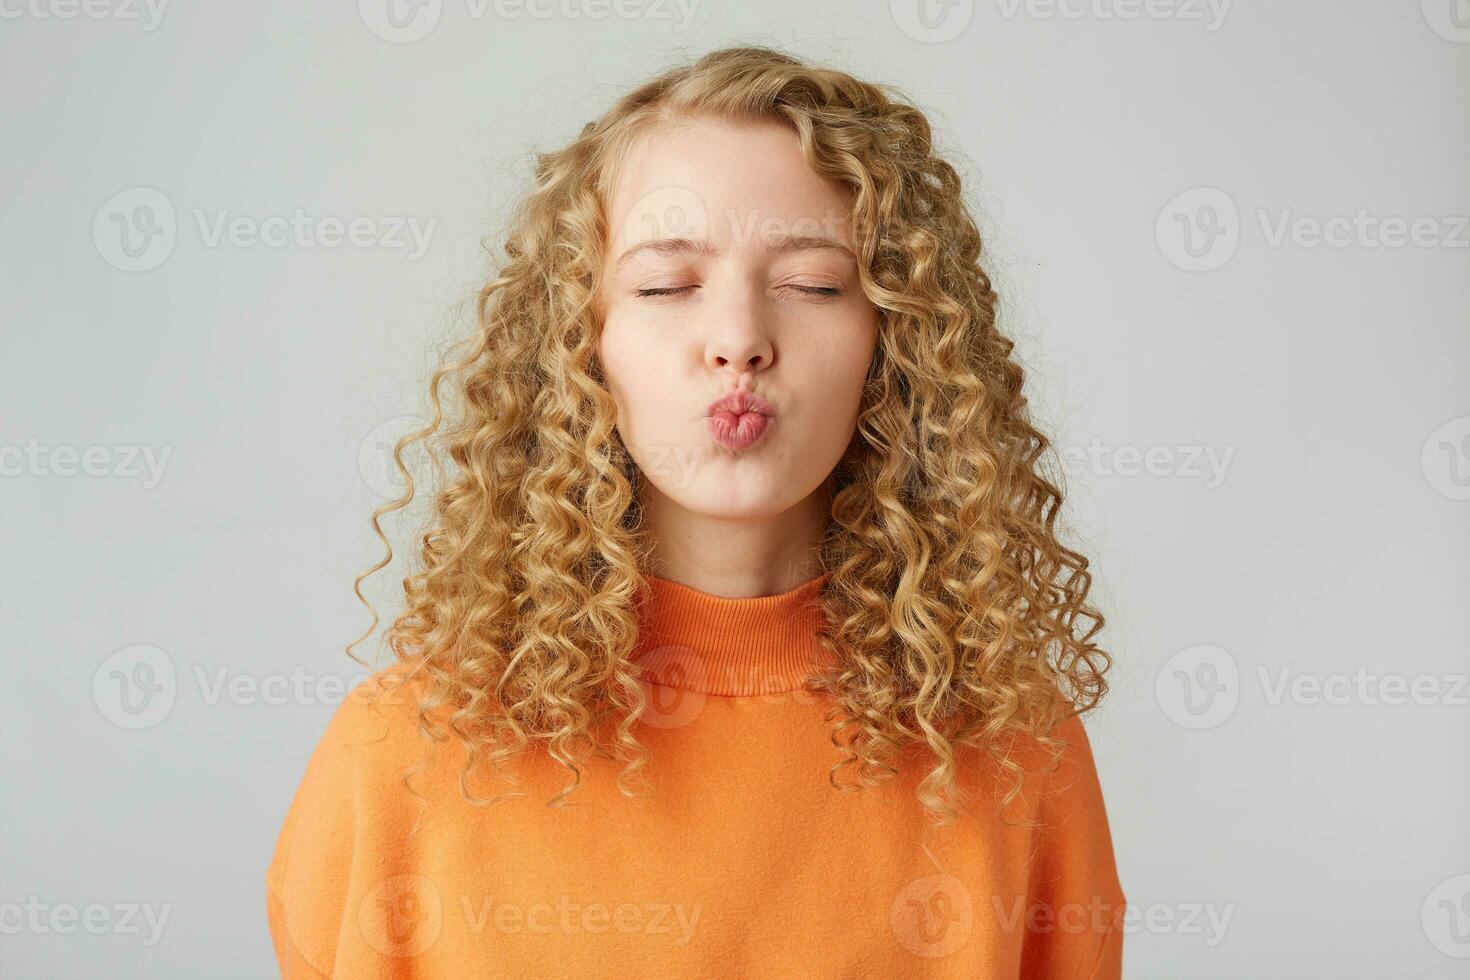 Portrait of pretty curly girl sending air kiss with pout lips and closed eyes isolated on white background, shows tender feelings.Sweet kiss directly to the camera. photo